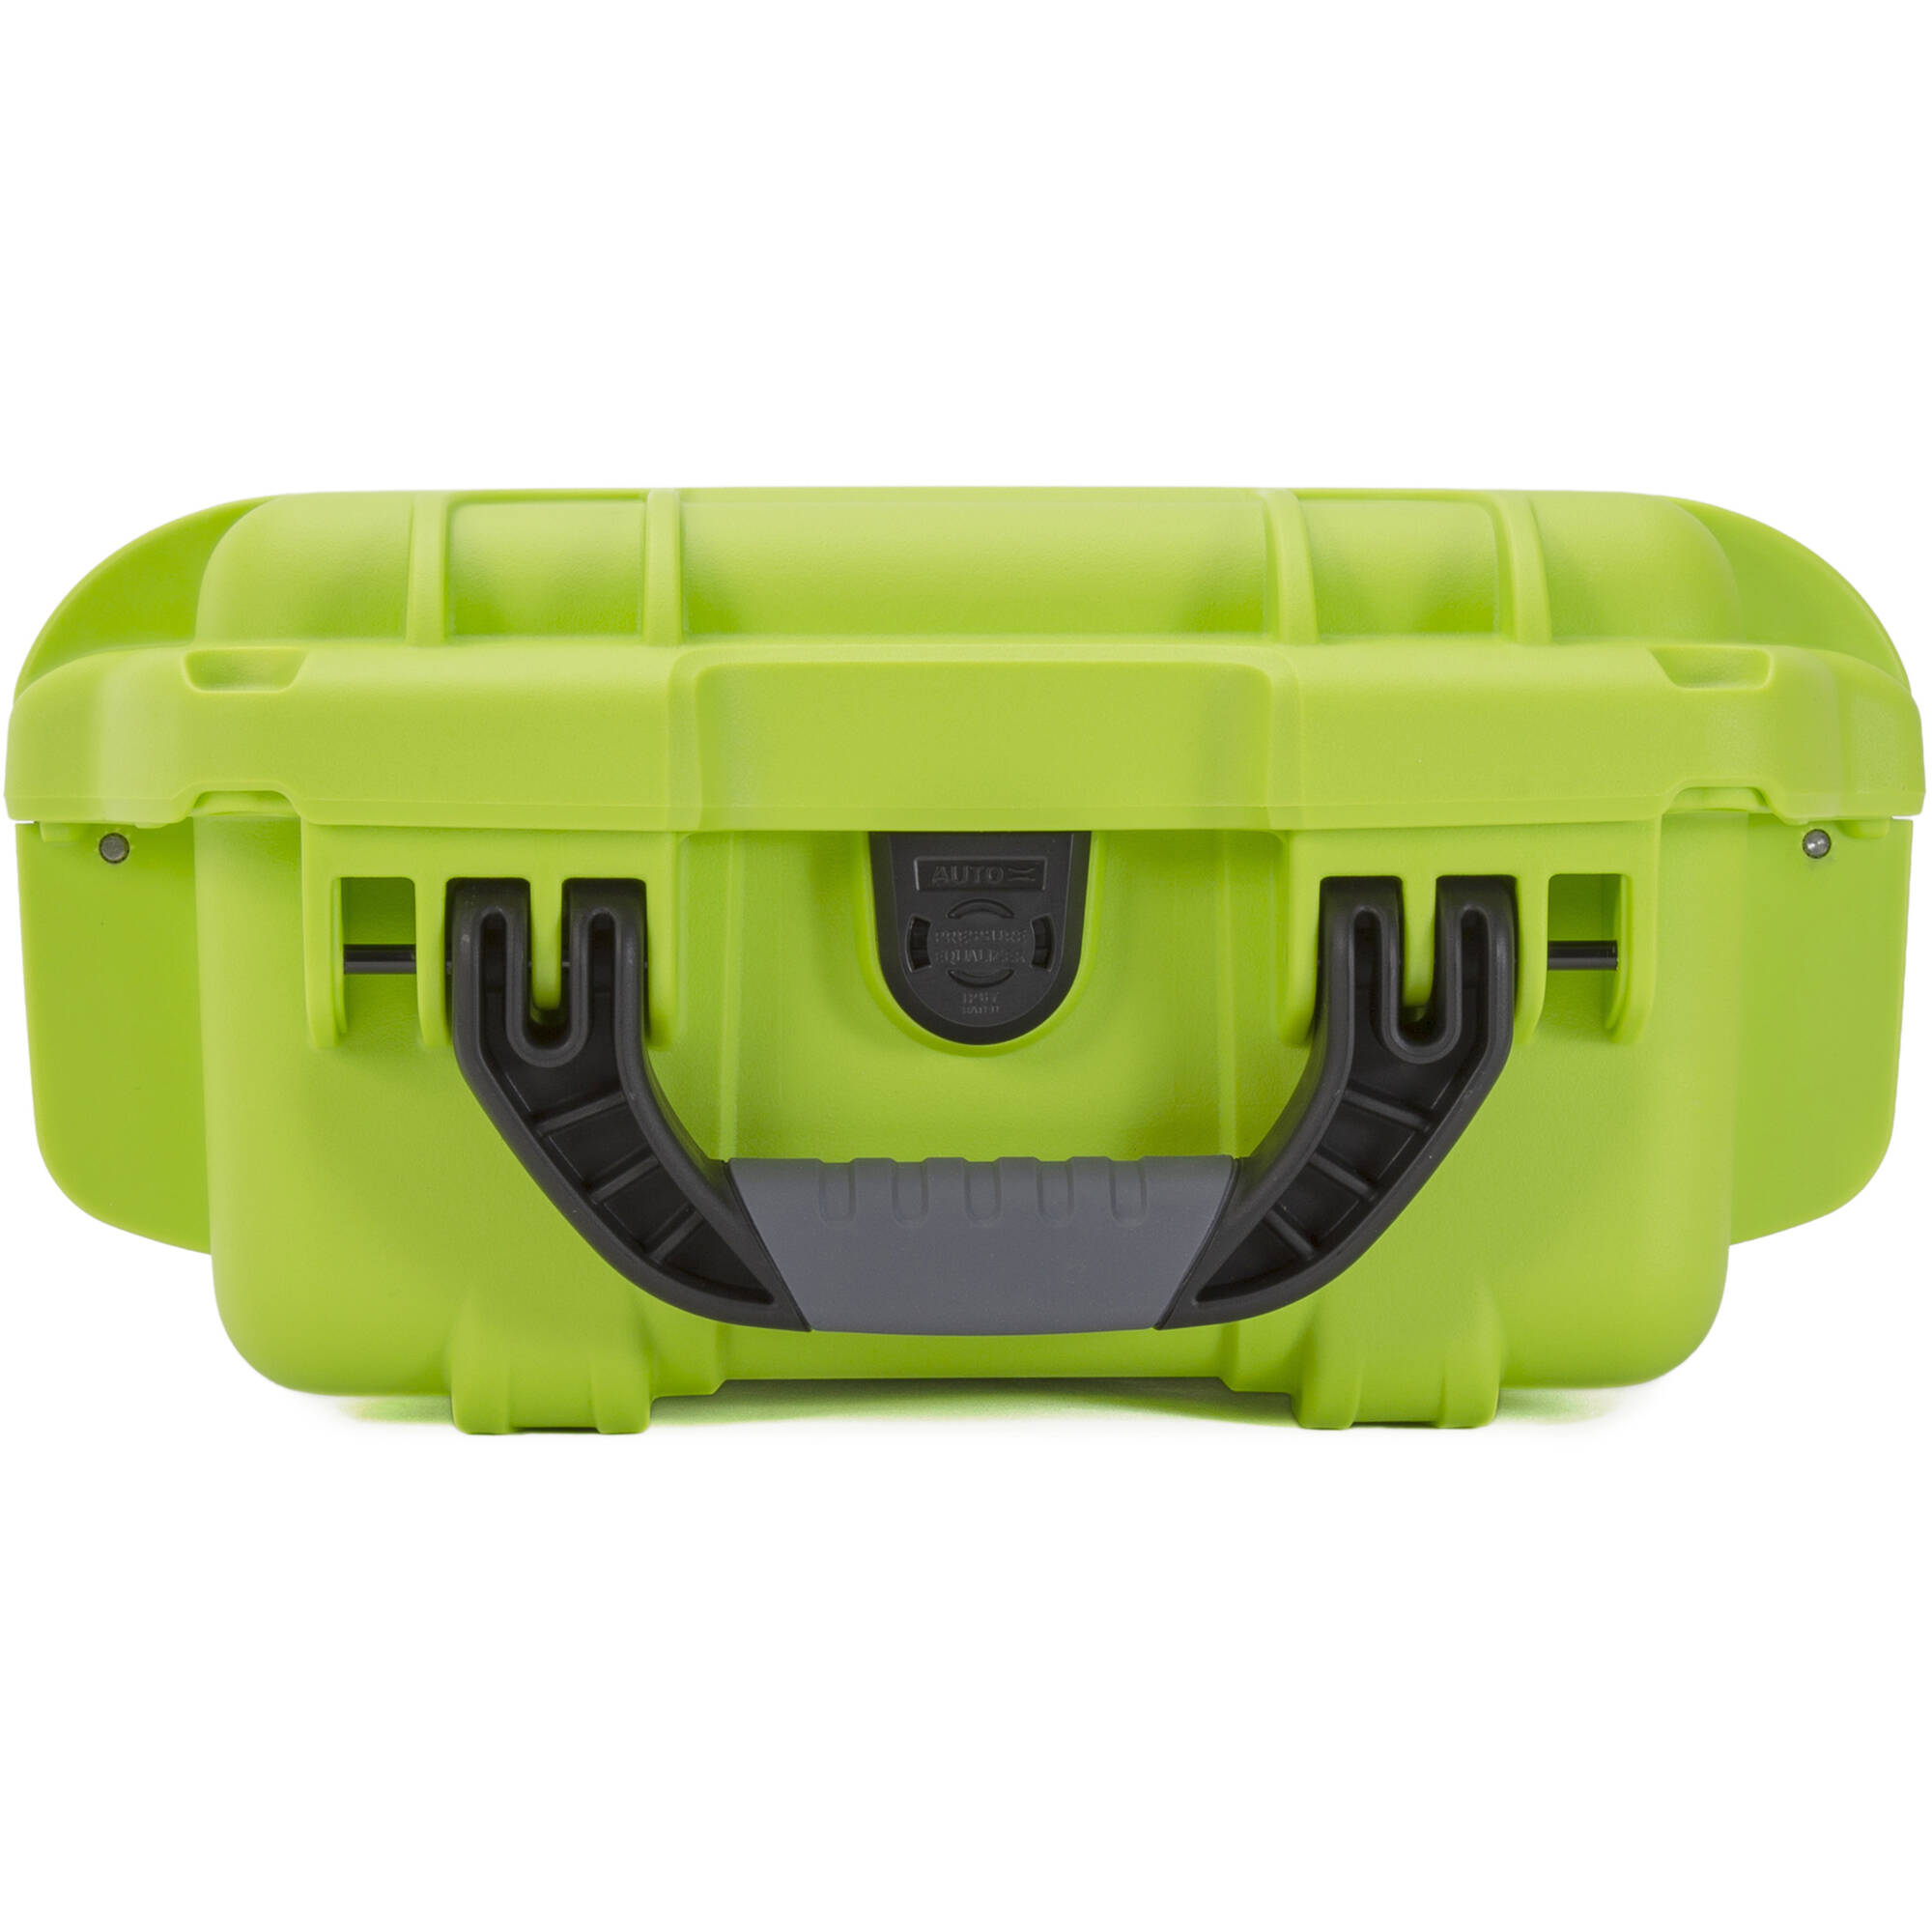 Nanuk 905 Waterproof Hard Case Pro Photo/Video Kit with Padded Dividers and Lid Organizer (Lime)